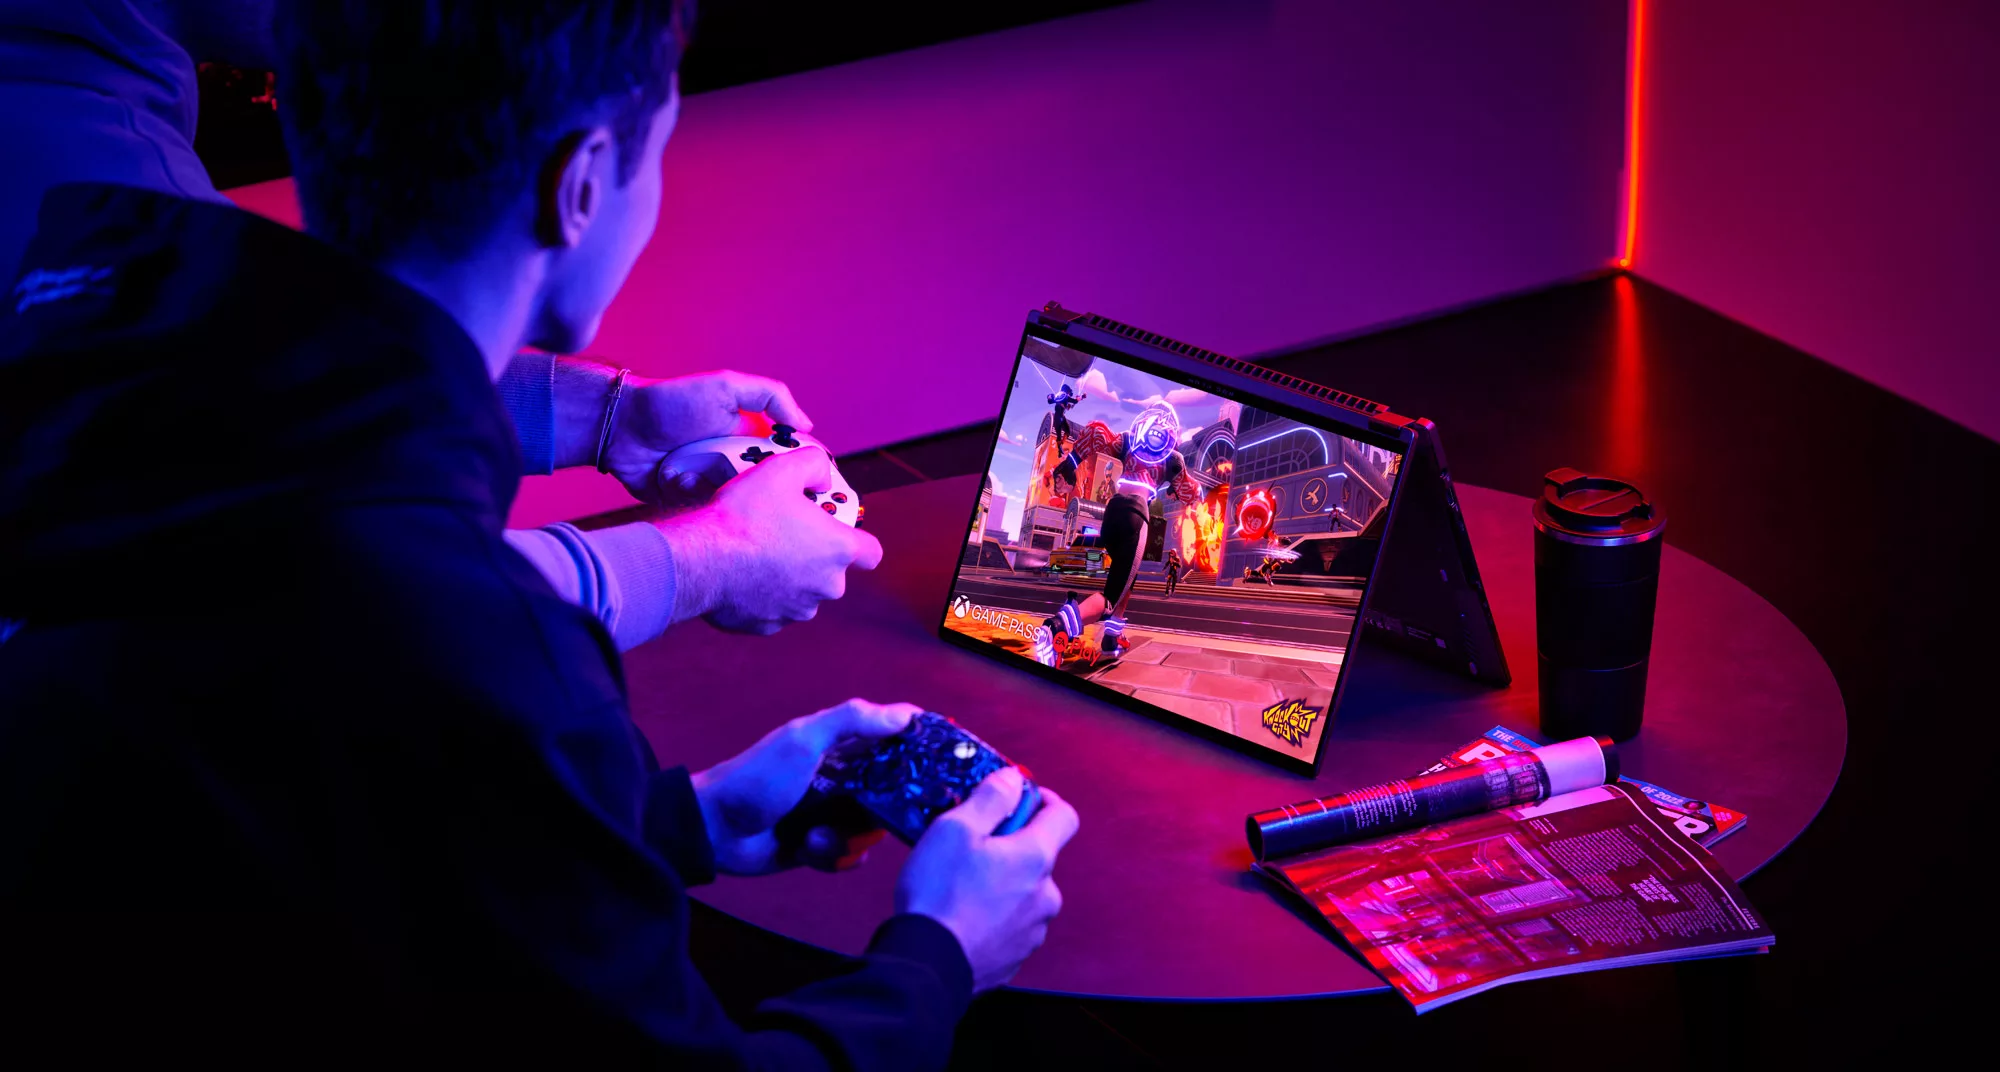 An image of two people playing video games on the ROG Flow X16 in tent mode, using game controllers.